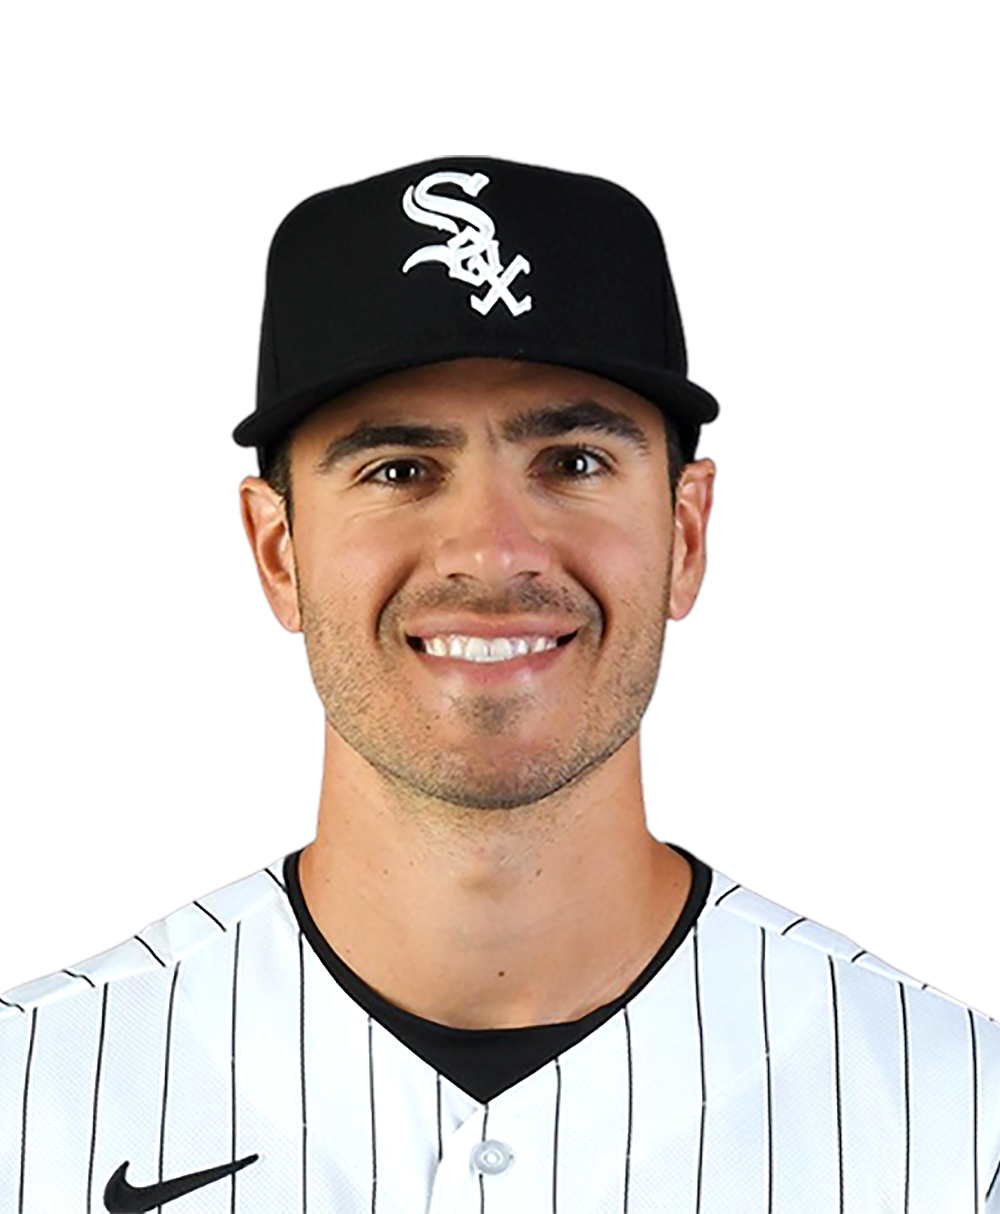 The New York Yankees should trade for Chicago White Sox OF Adam